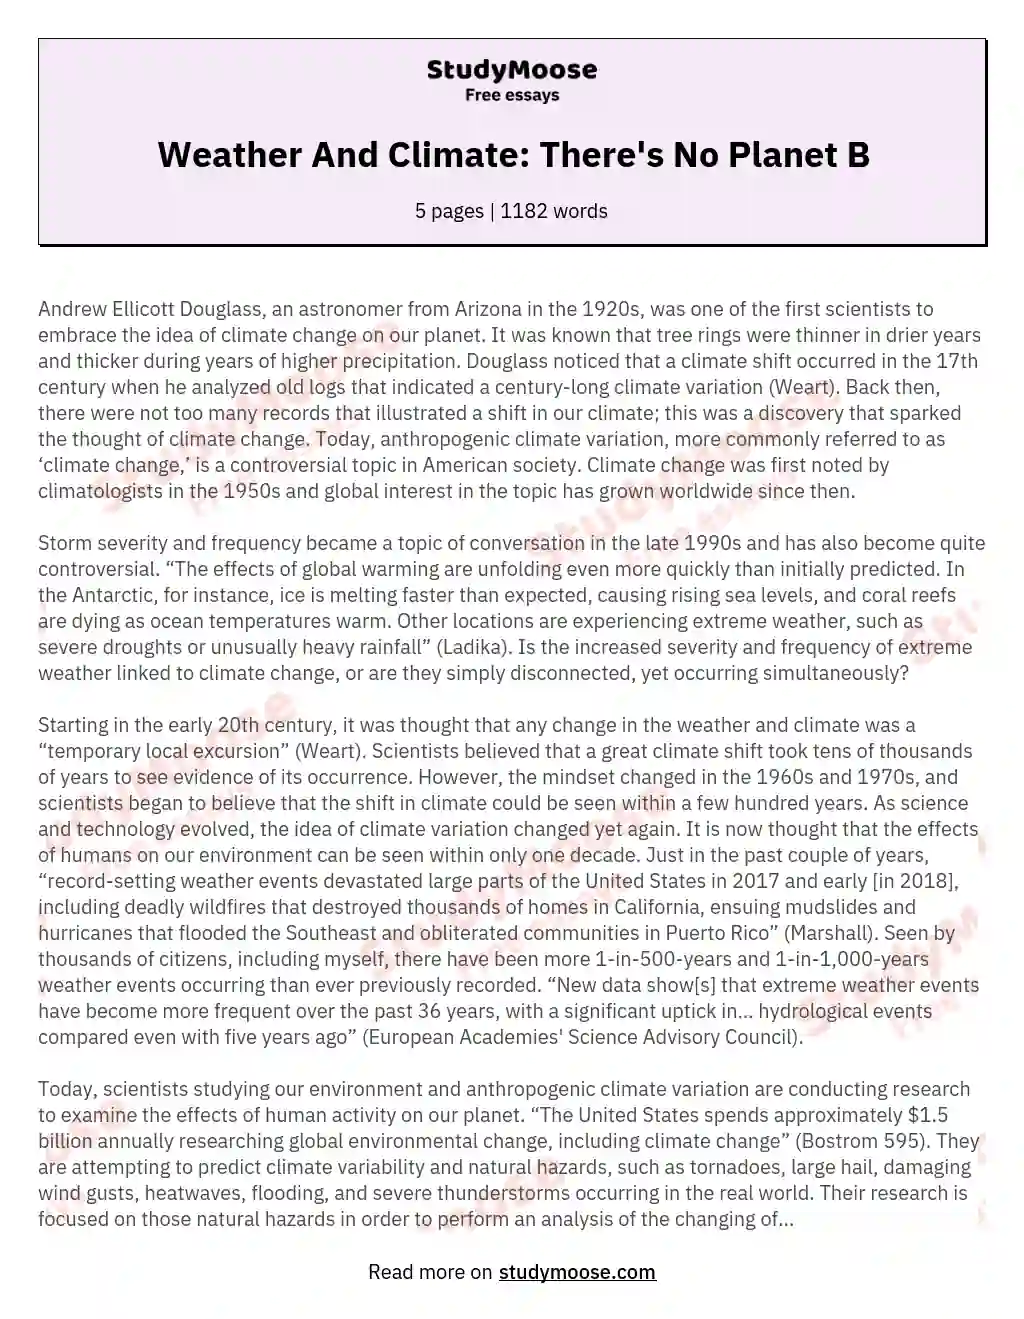 Weather And Climate: There's No Planet B essay